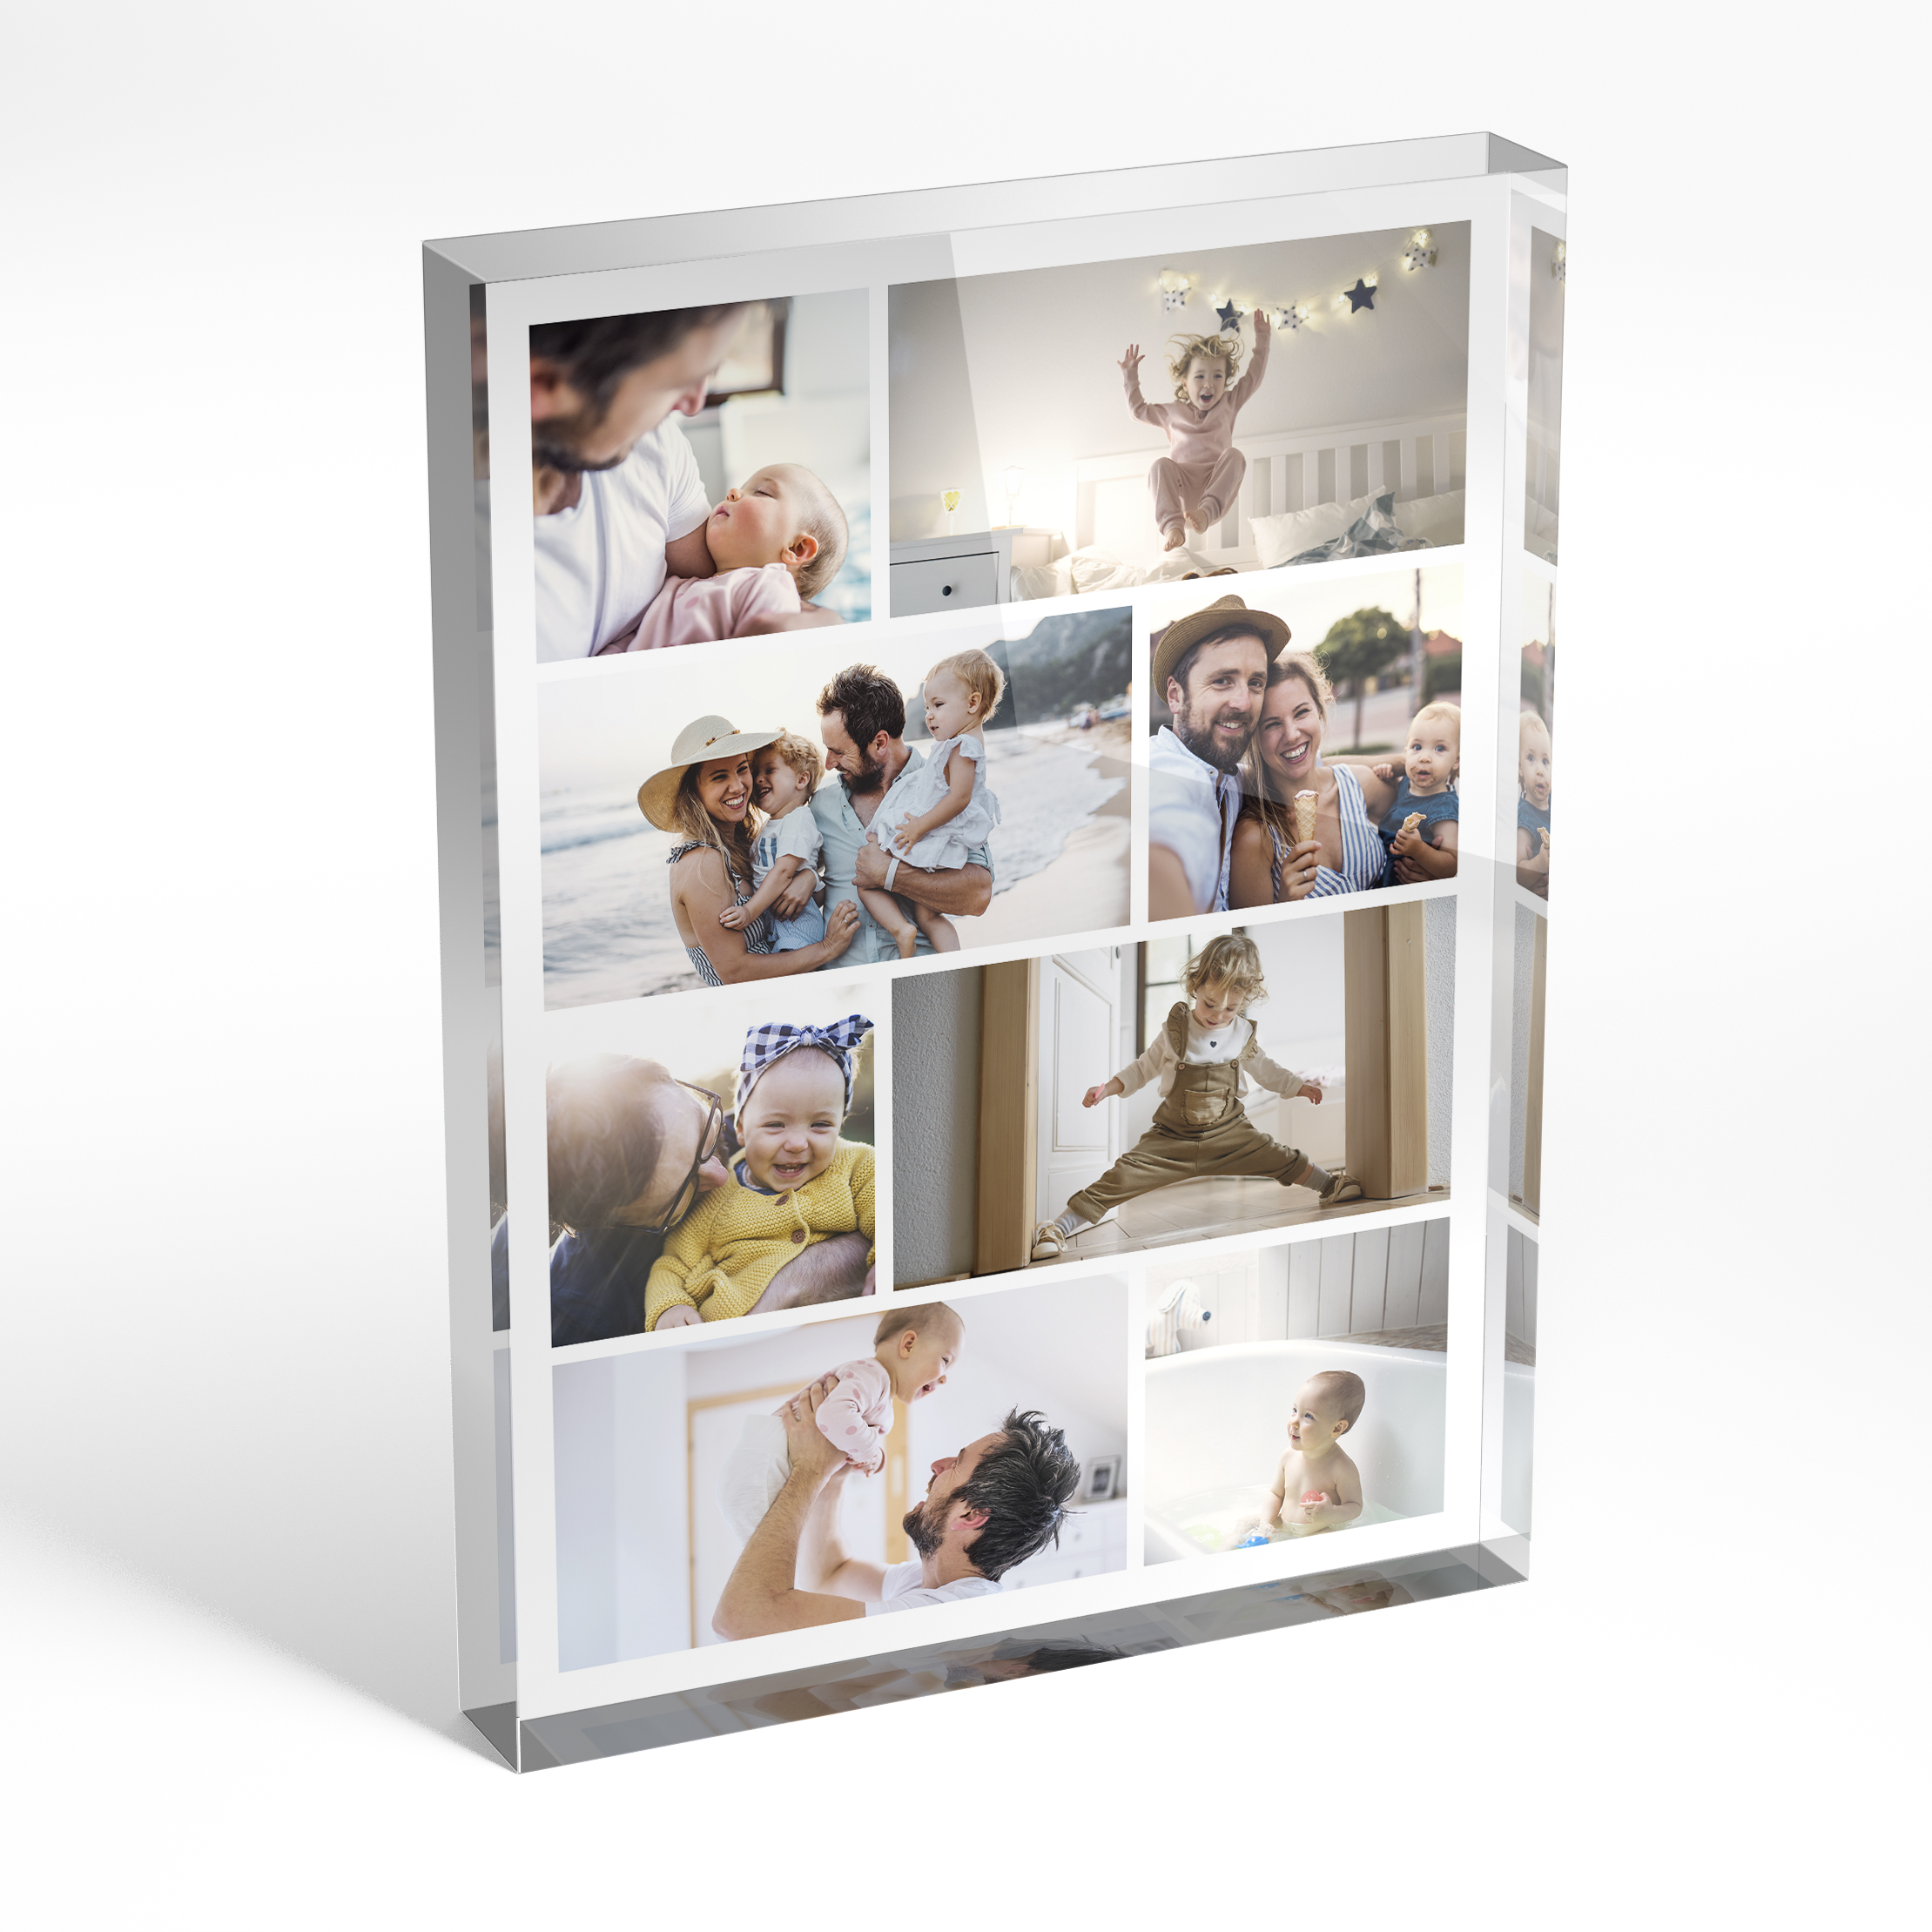 An angled side view of a portrait layout Acrylic Glass Photo Block with space for 8 photos. Thiis design is named "Playful Memories". 